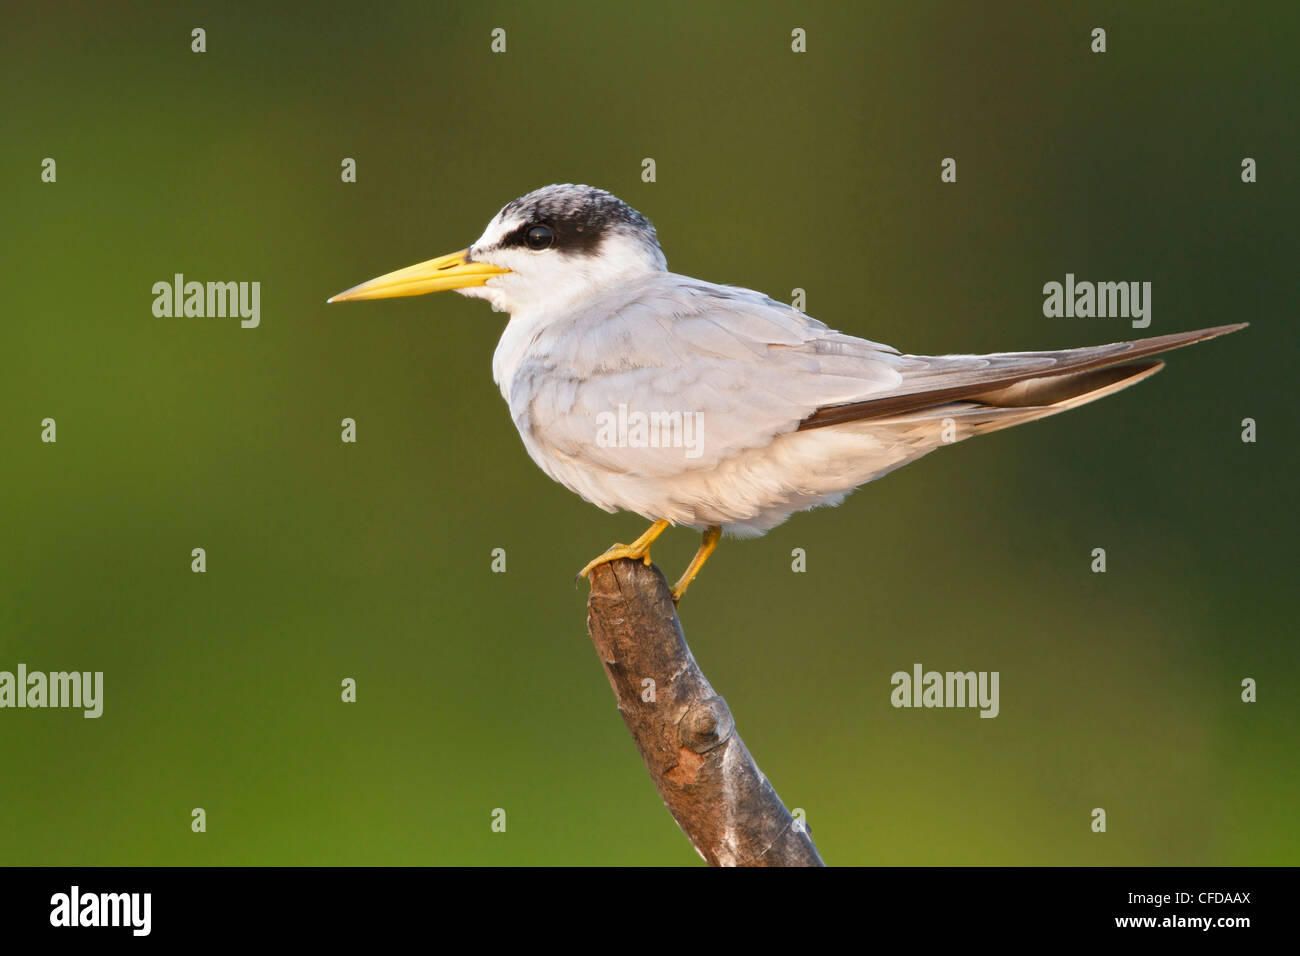 Yellow-billed Tern (Sterna superciliaris) perched on a branch in Ecuador. Stock Photo